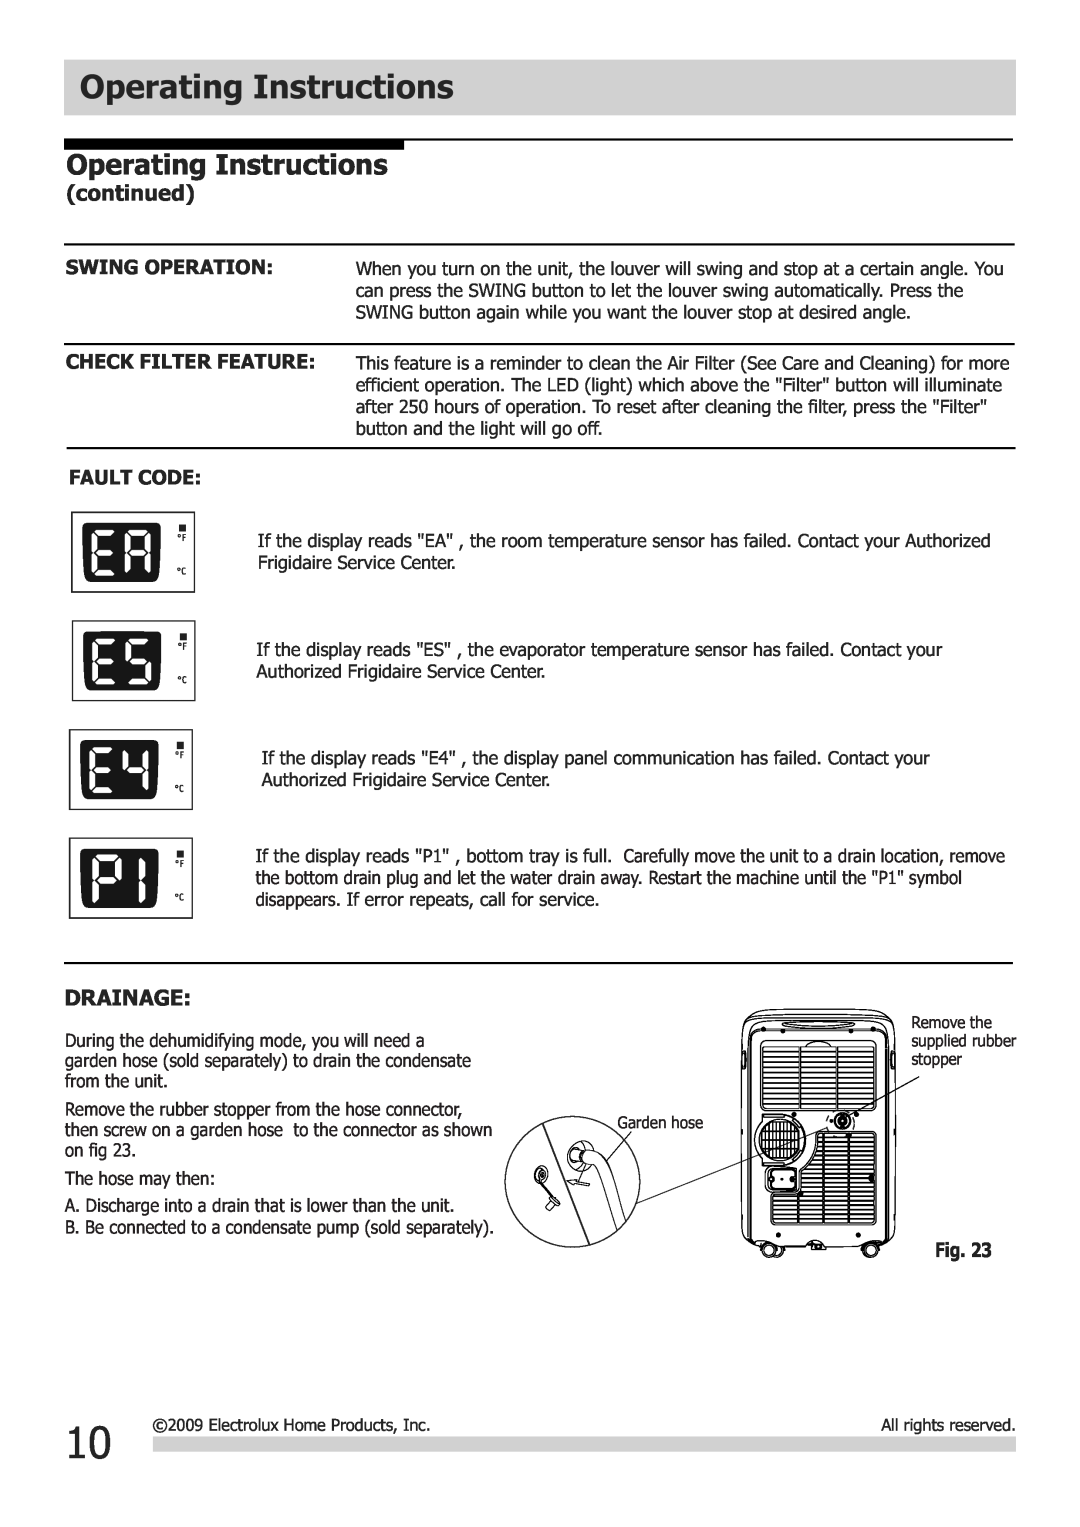 Frigidaire FGHD2472PF installation instructions Drainage, Fault Code, Operating Instructions, continued 